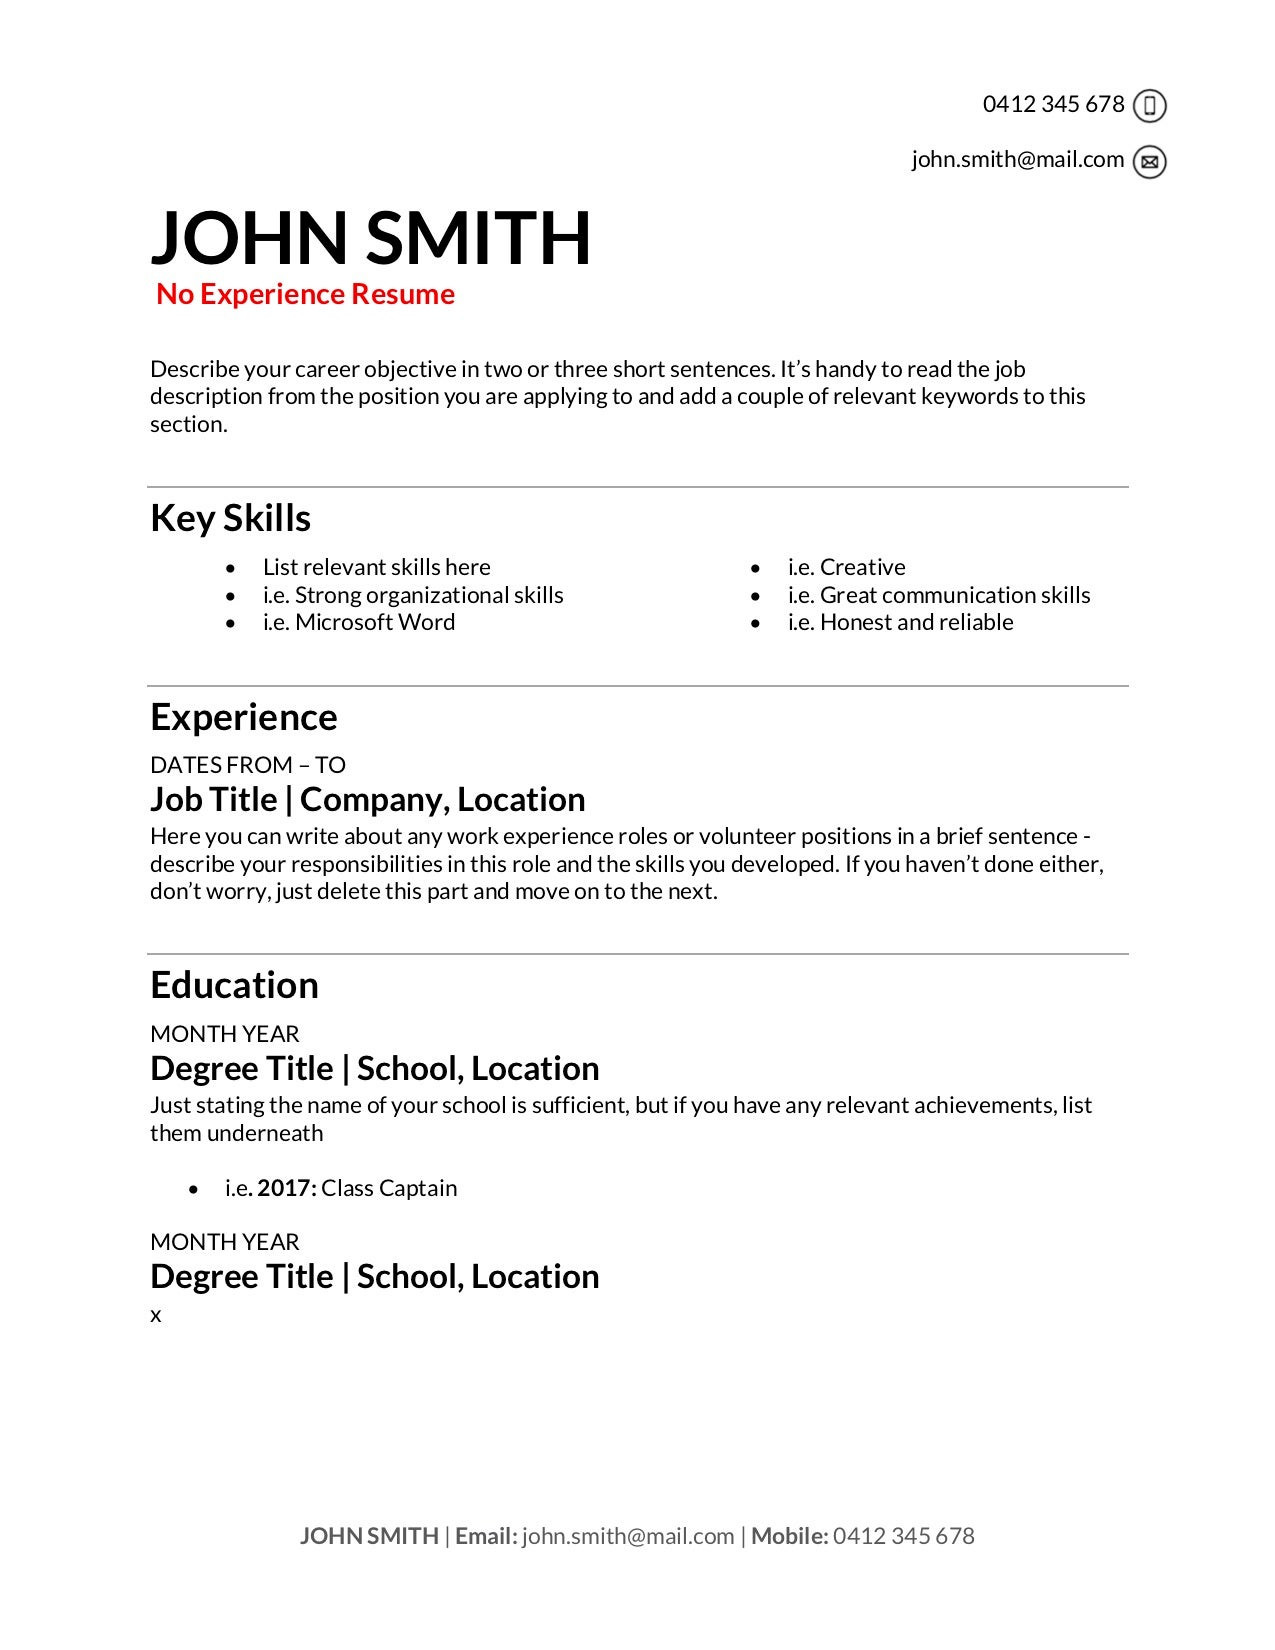 Sample Of Golf Outside Services Resume for Job Application Free Resume Templates [download]: How to Write A Resume In 2022 …